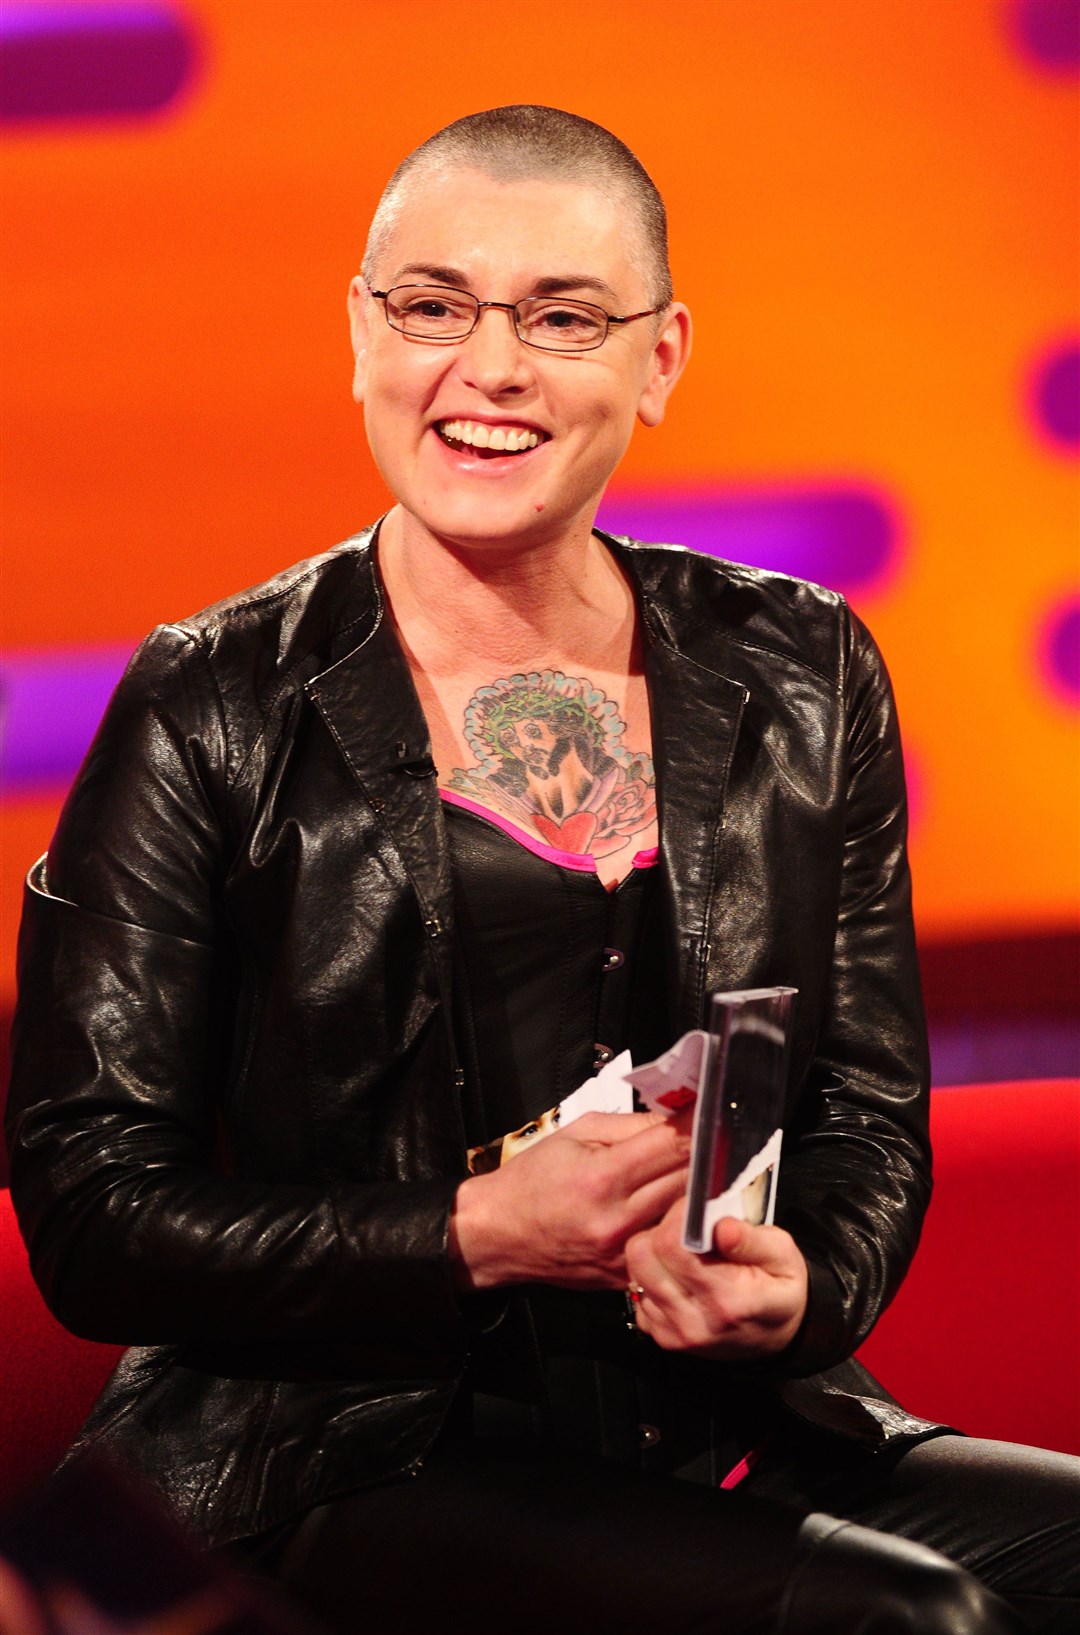 Sinead O’Connor during the filming of the Graham Norton show at the London Studios in 2017 (PA)